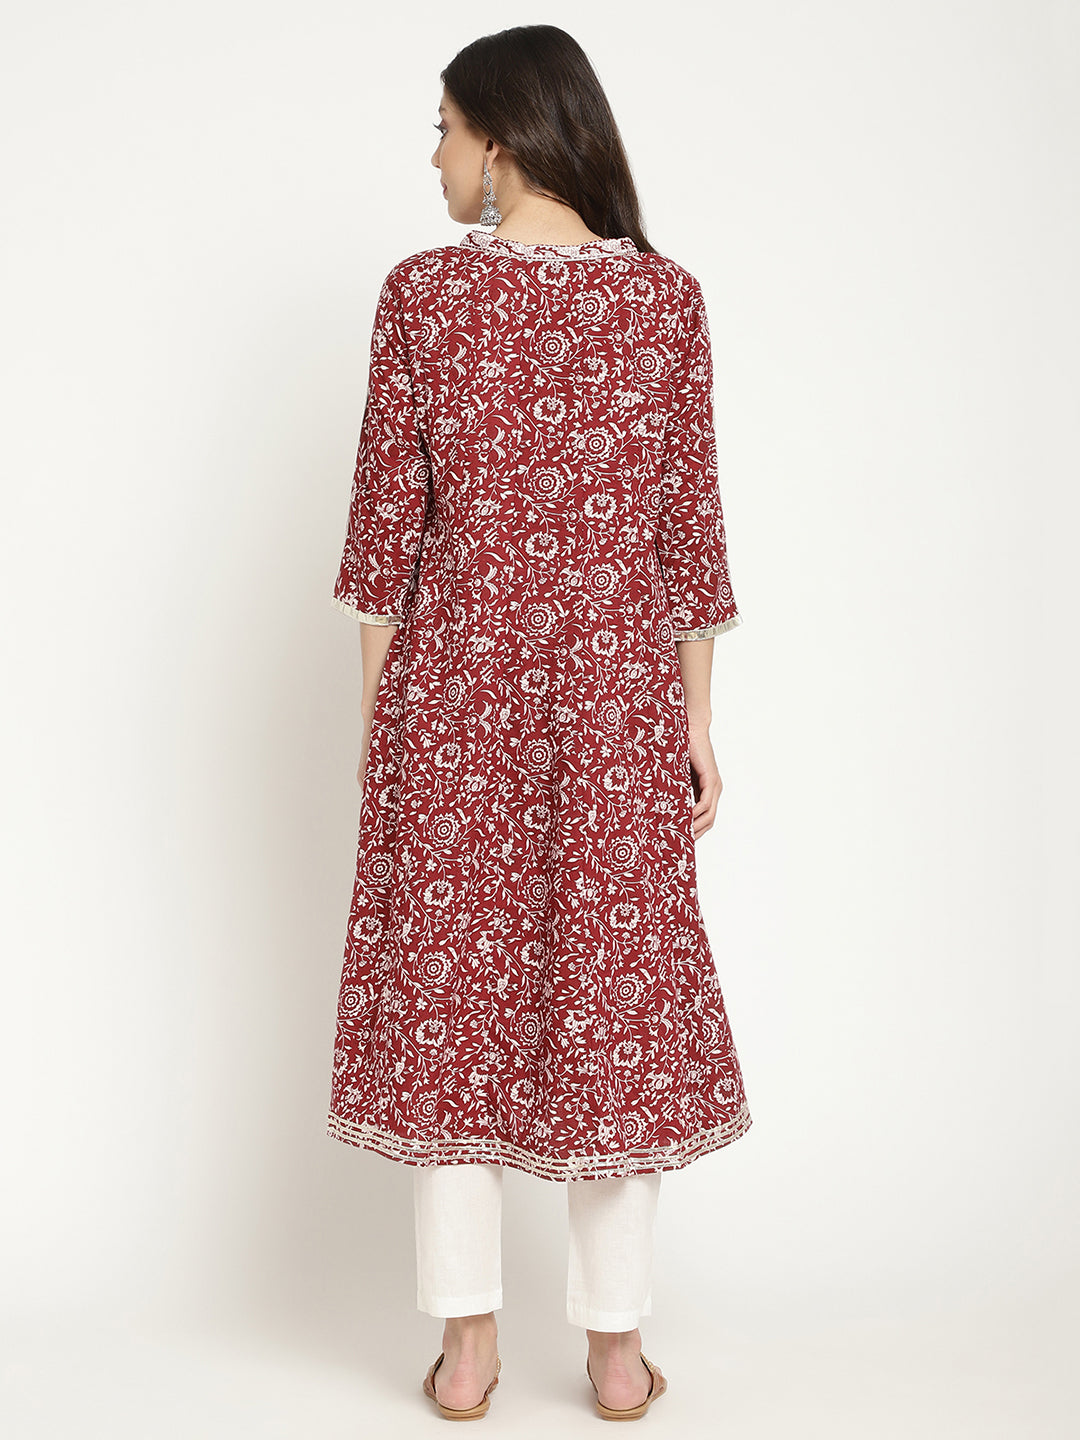 Woman posing in a flared Kurta against a white background. 